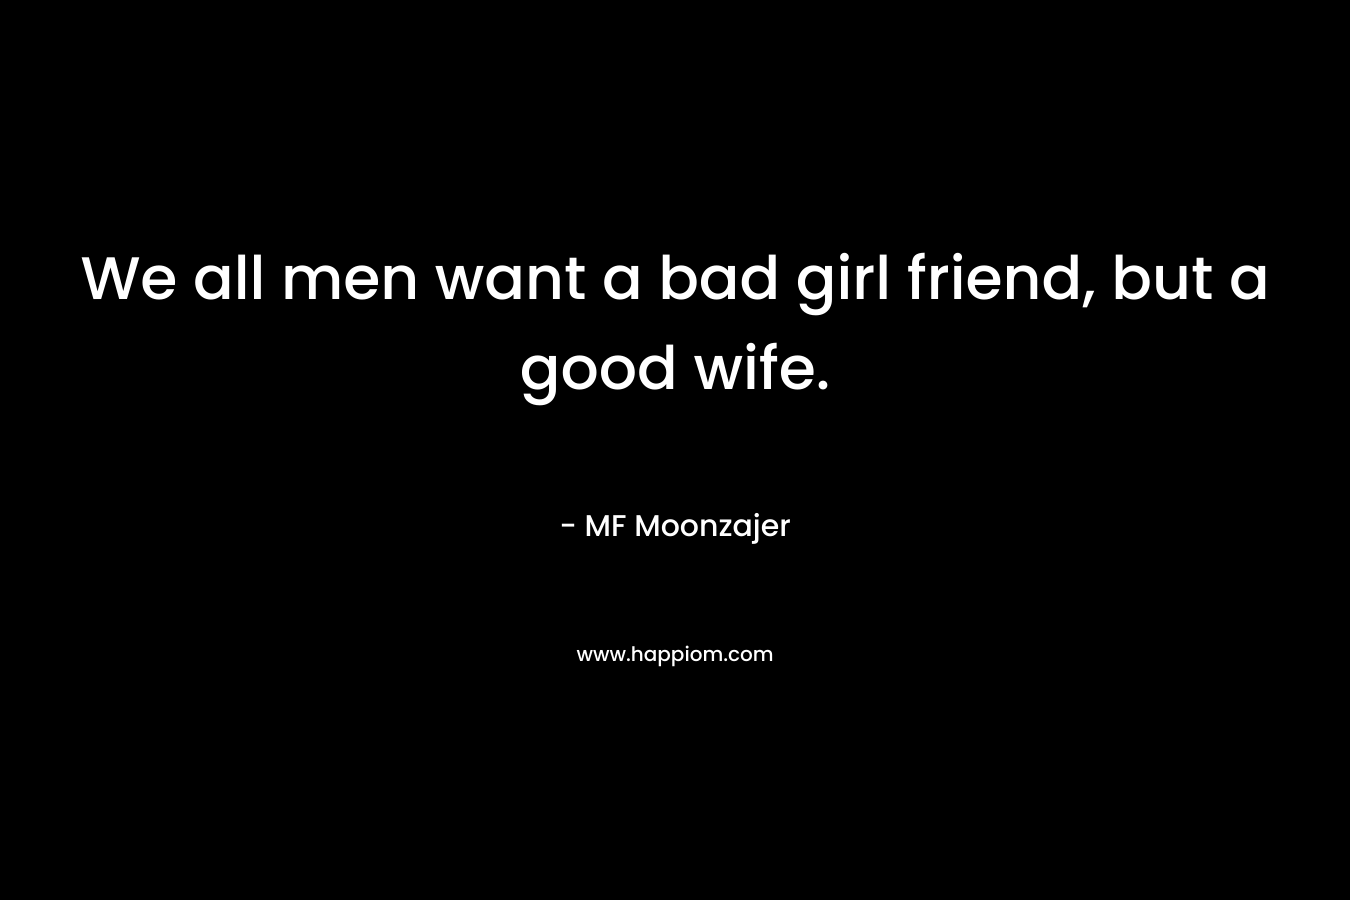 We all men want a bad girl friend, but a good wife.